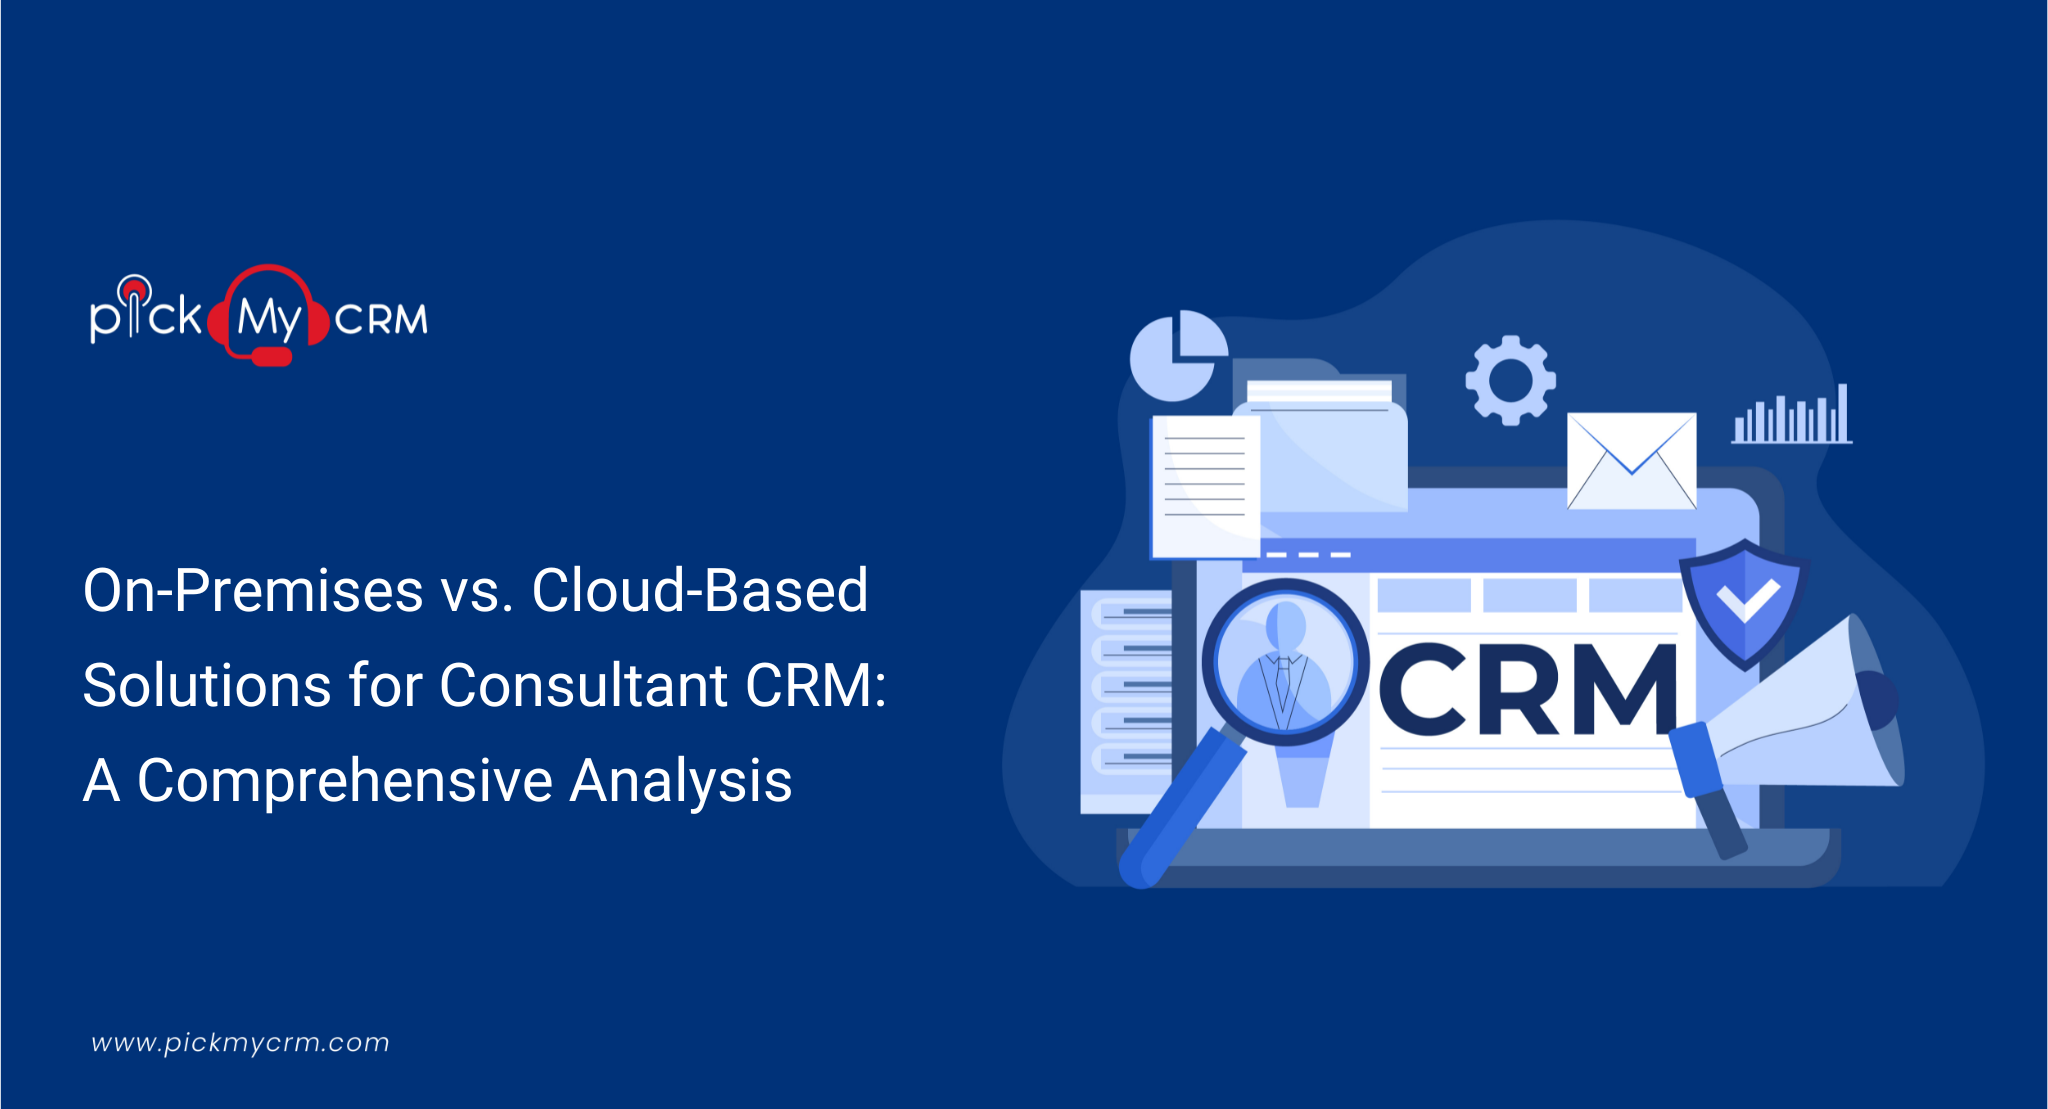 On-Premises vs. Cloud-Based Solutions for Consultant CRM: A Comprehensive Analysis